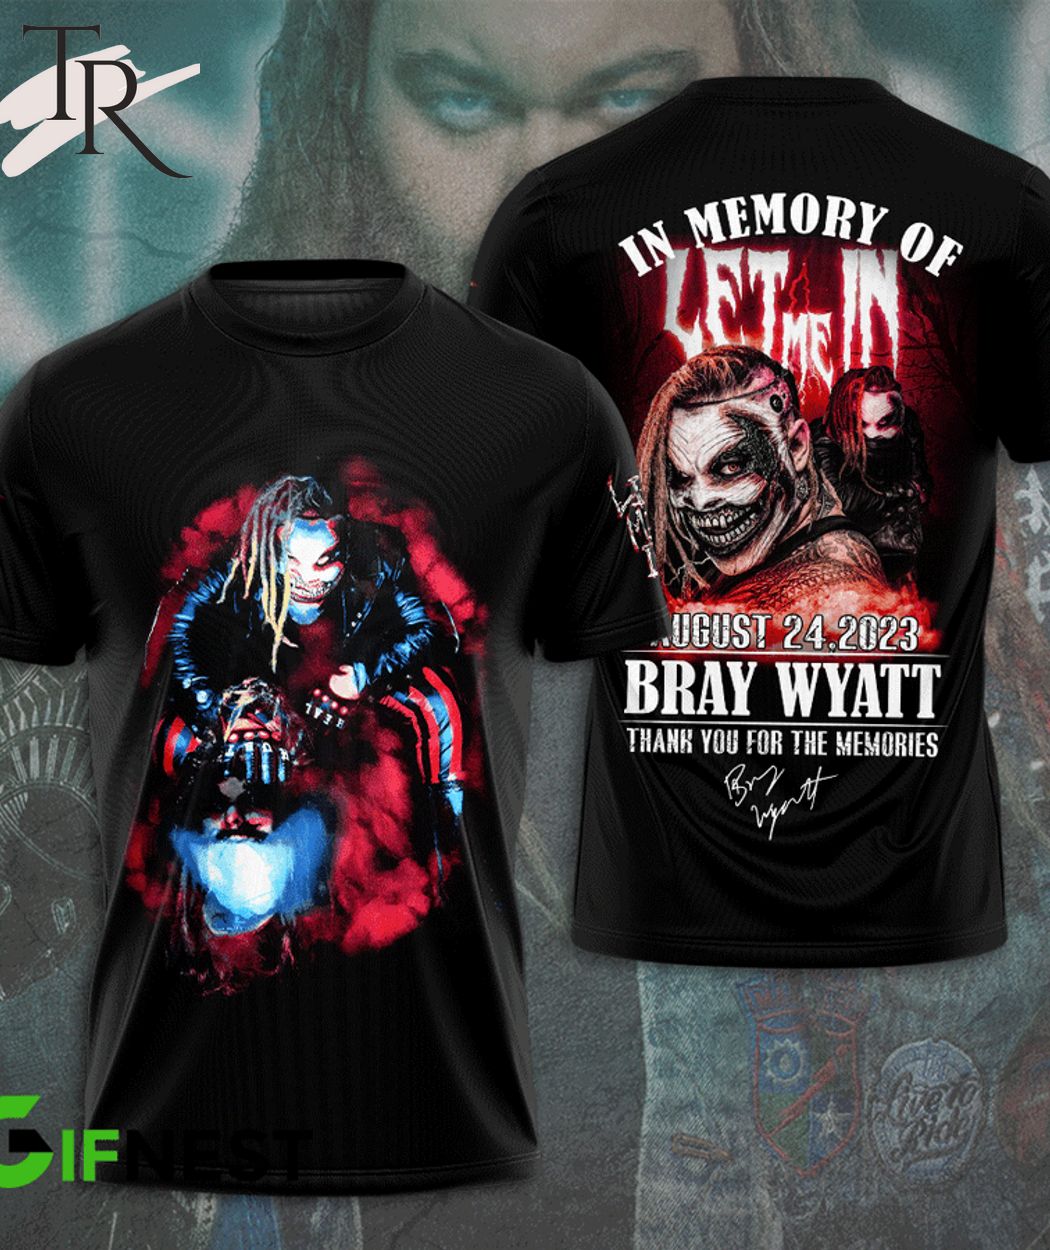 https://images.torunstyle.com/wp-content/uploads/2023/08/28085814/in-memory-of-august-24-2023-bray-wyatt-let-me-in-thank-you-for-the-memories-t-shirt-1-JdQHj.jpg